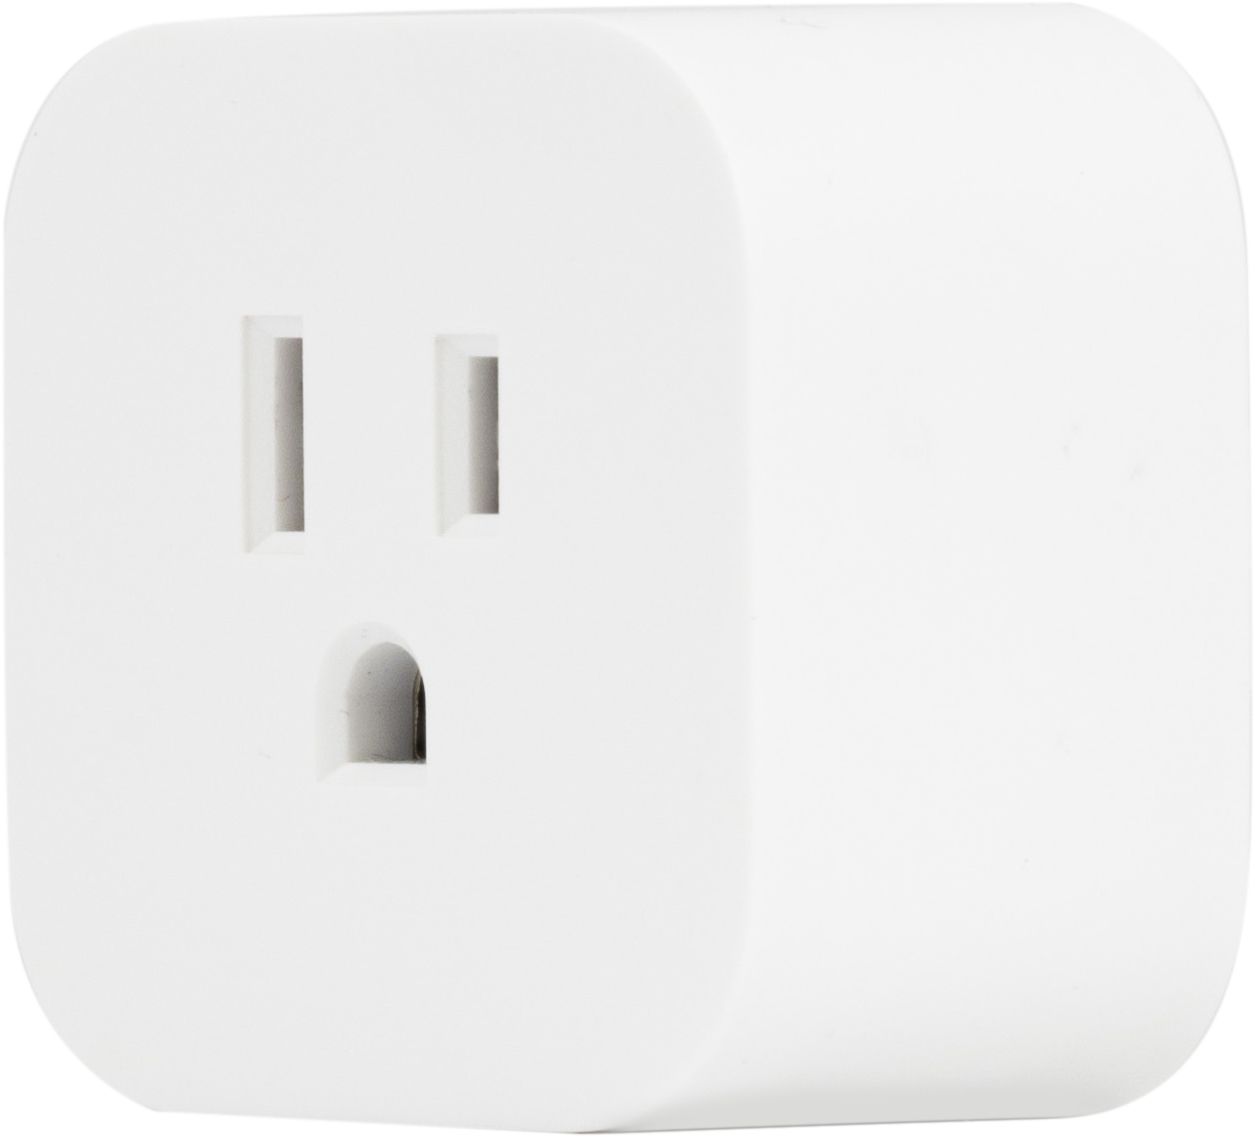 Enbrighten WiFi Plug On Off Smart Switch, 4 Pack - evergreenly